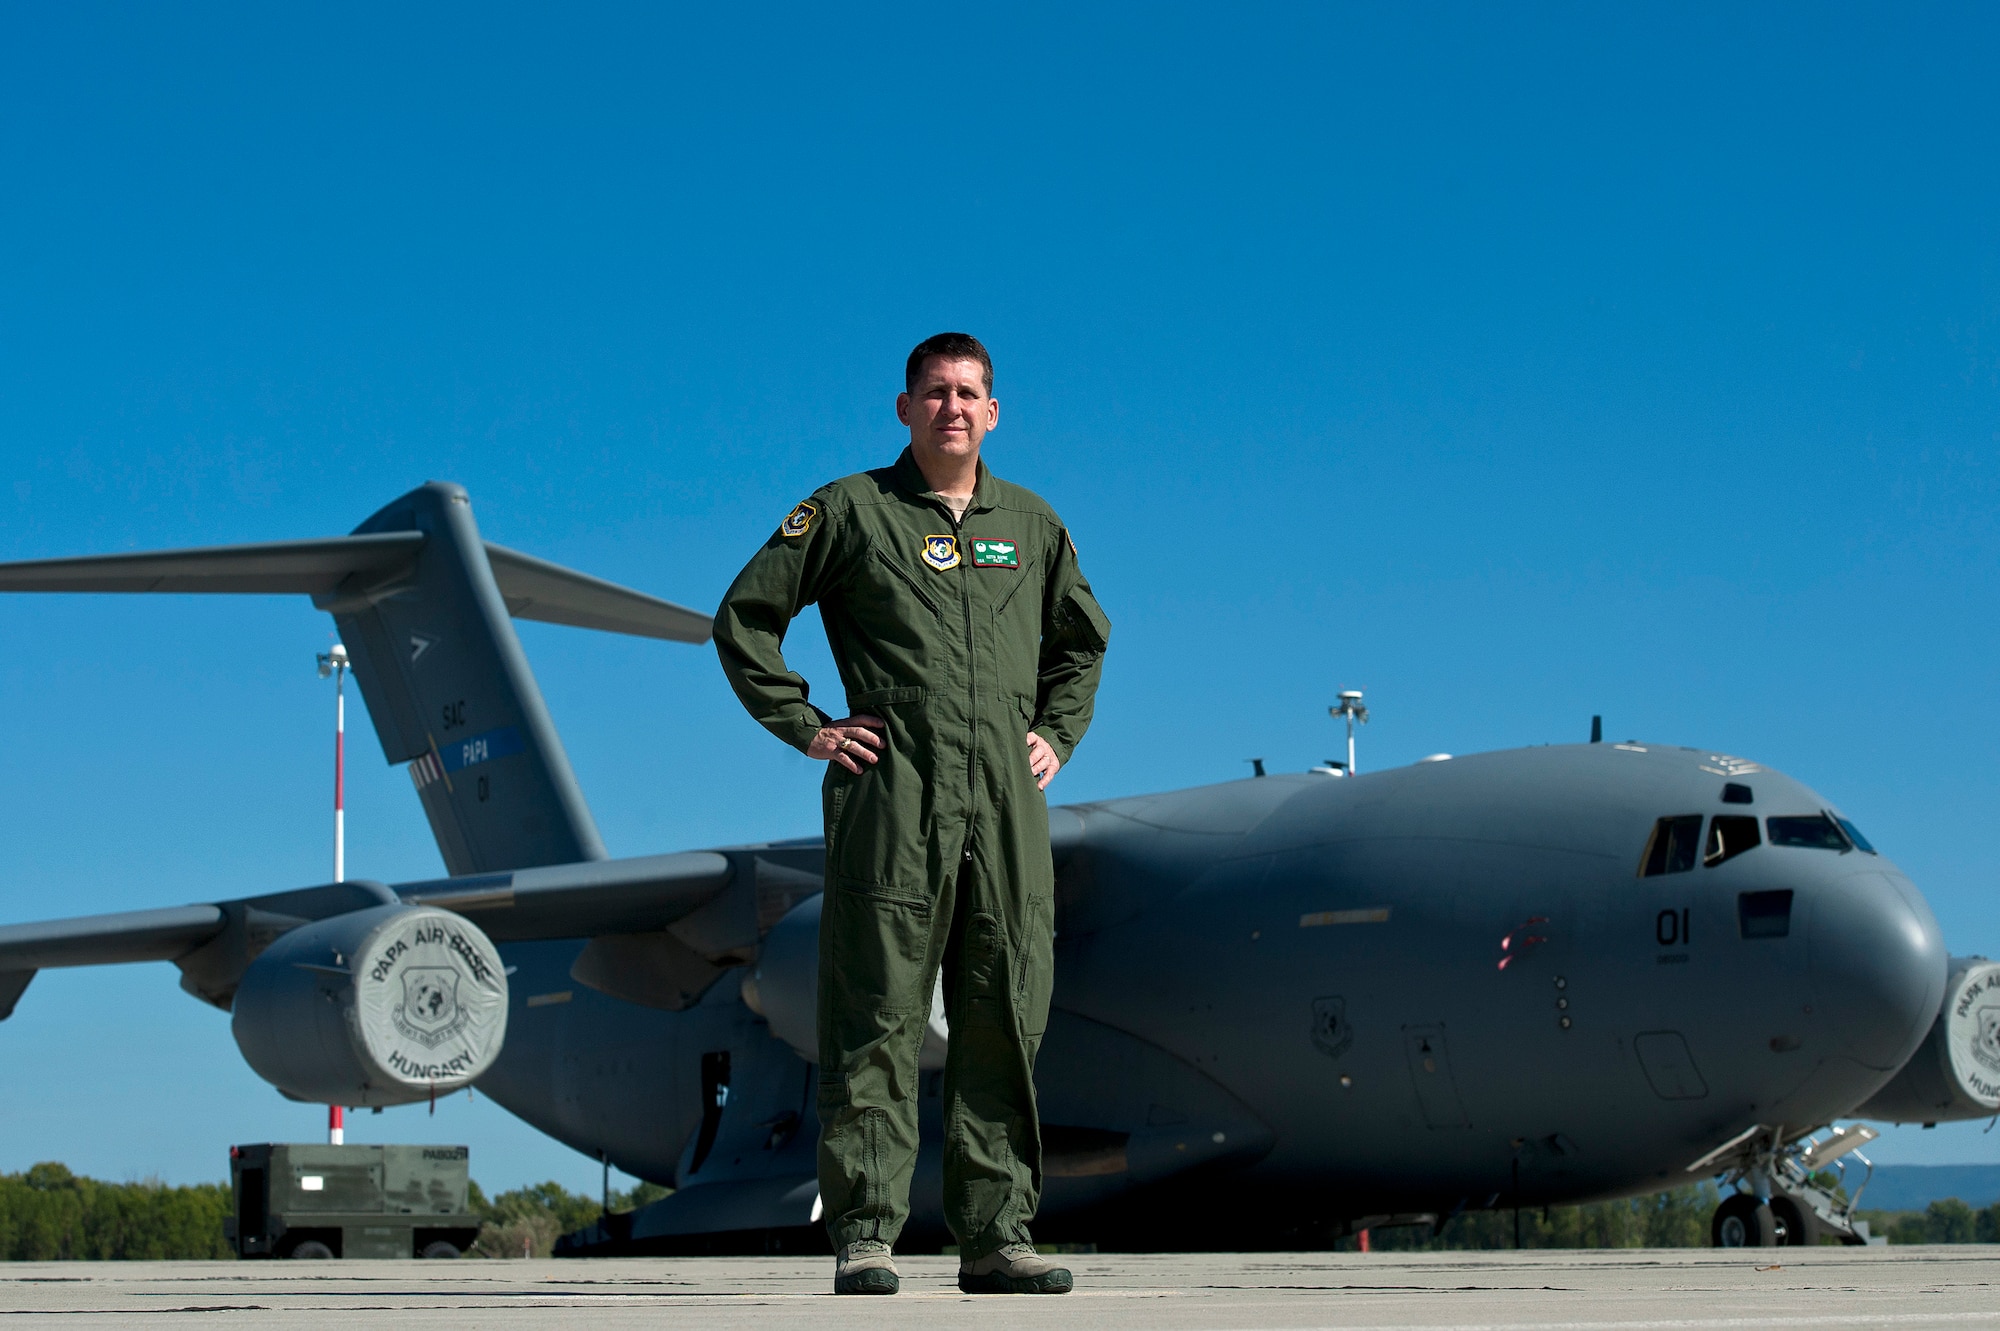 Col. Keith Boone, Heavy Airlift Wing Commander, oversees the strategic airlift operations and personnel of 12 different nations of the Strategic Airlift Capability Program at Papa Air Base, Hungary. (U.S. Air Force photo/Tech. Sgt. Bennie J. Davis III)